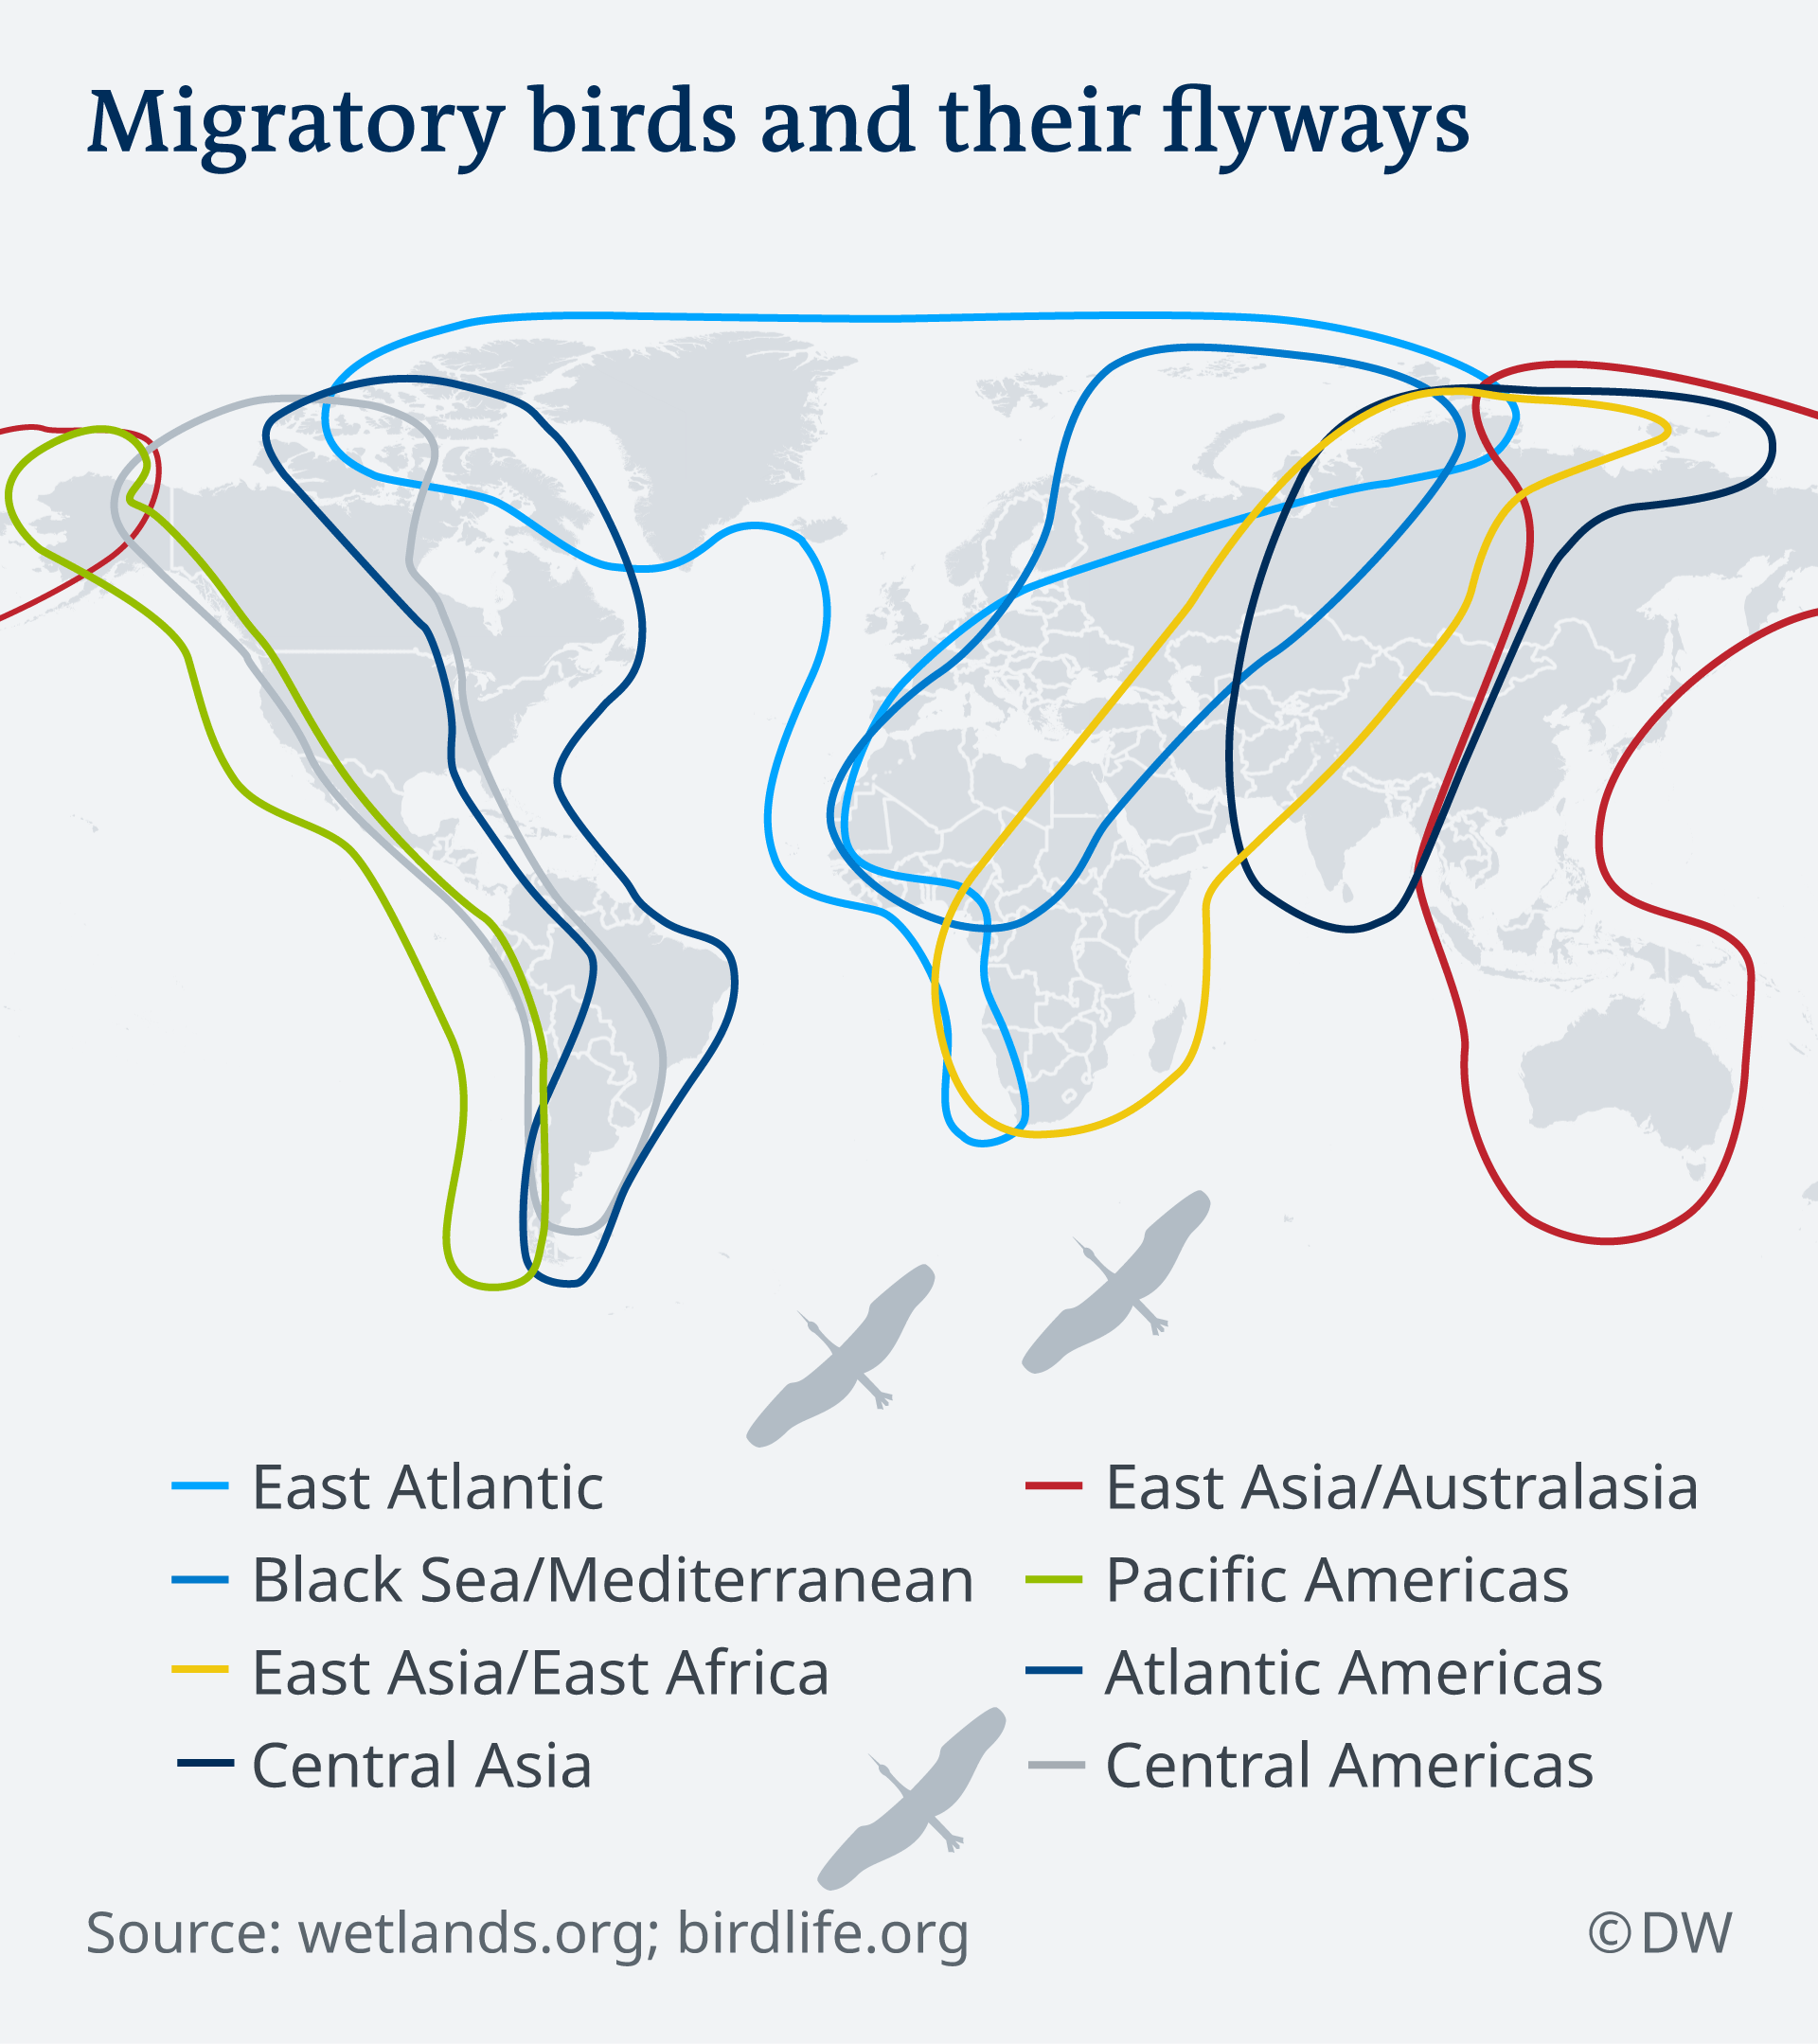 Migratory birds and their flyways